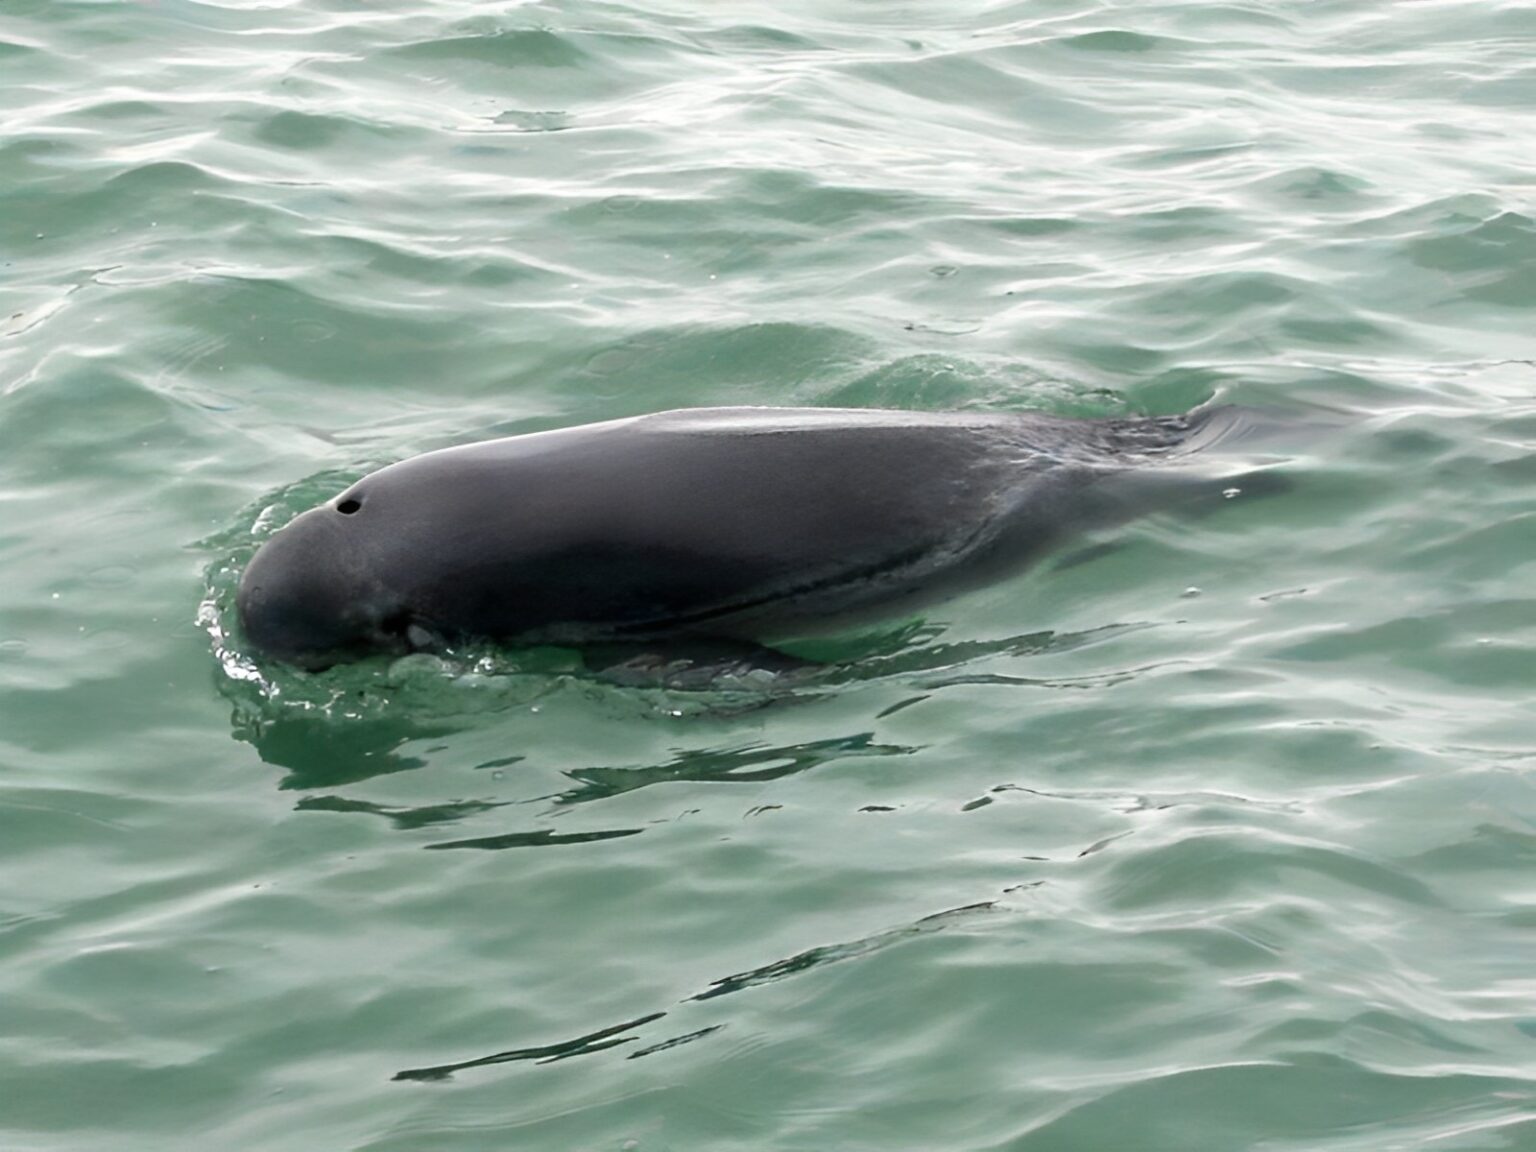 A finless porpoise swimming in the sea. The upper one-third of its body can be seen,, as well as its blowhole.